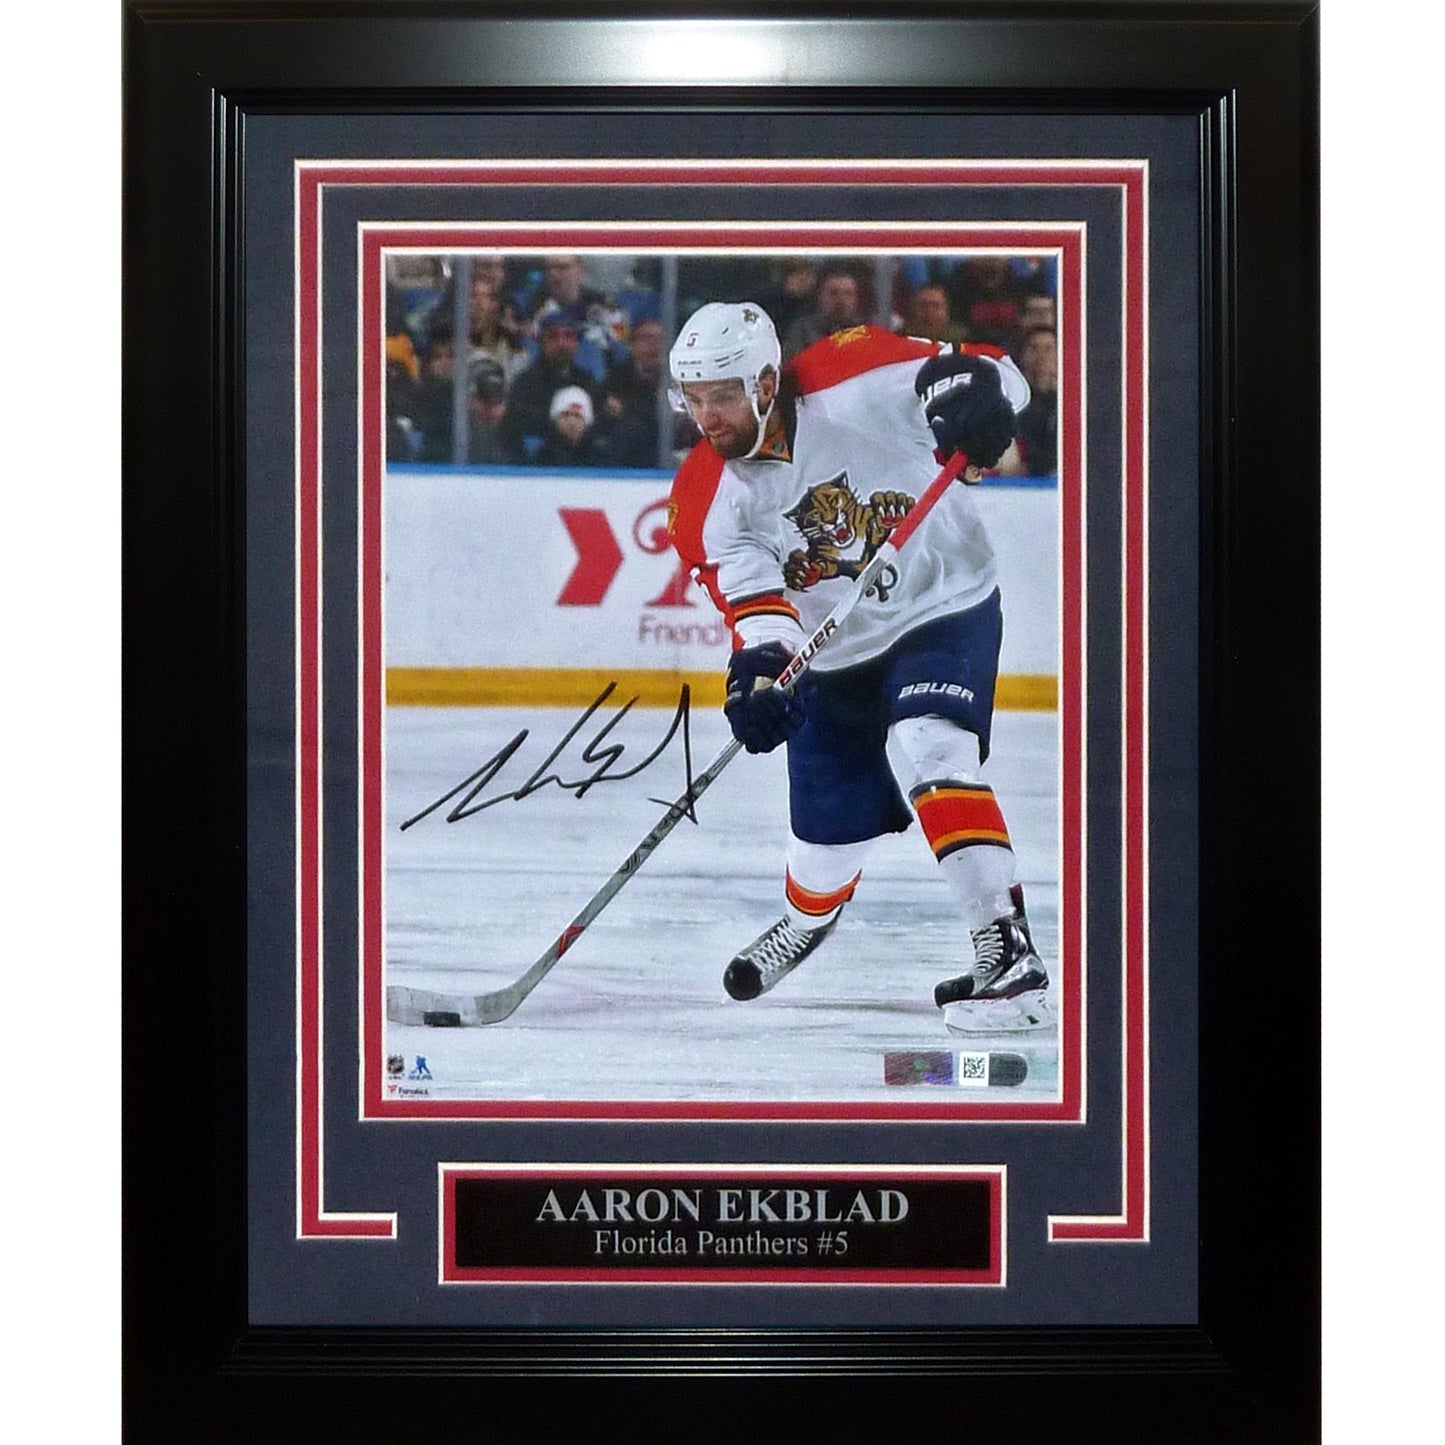 Aaron Ekblad Autographed Florida Panthers Deluxe Framed 8x10 Photo